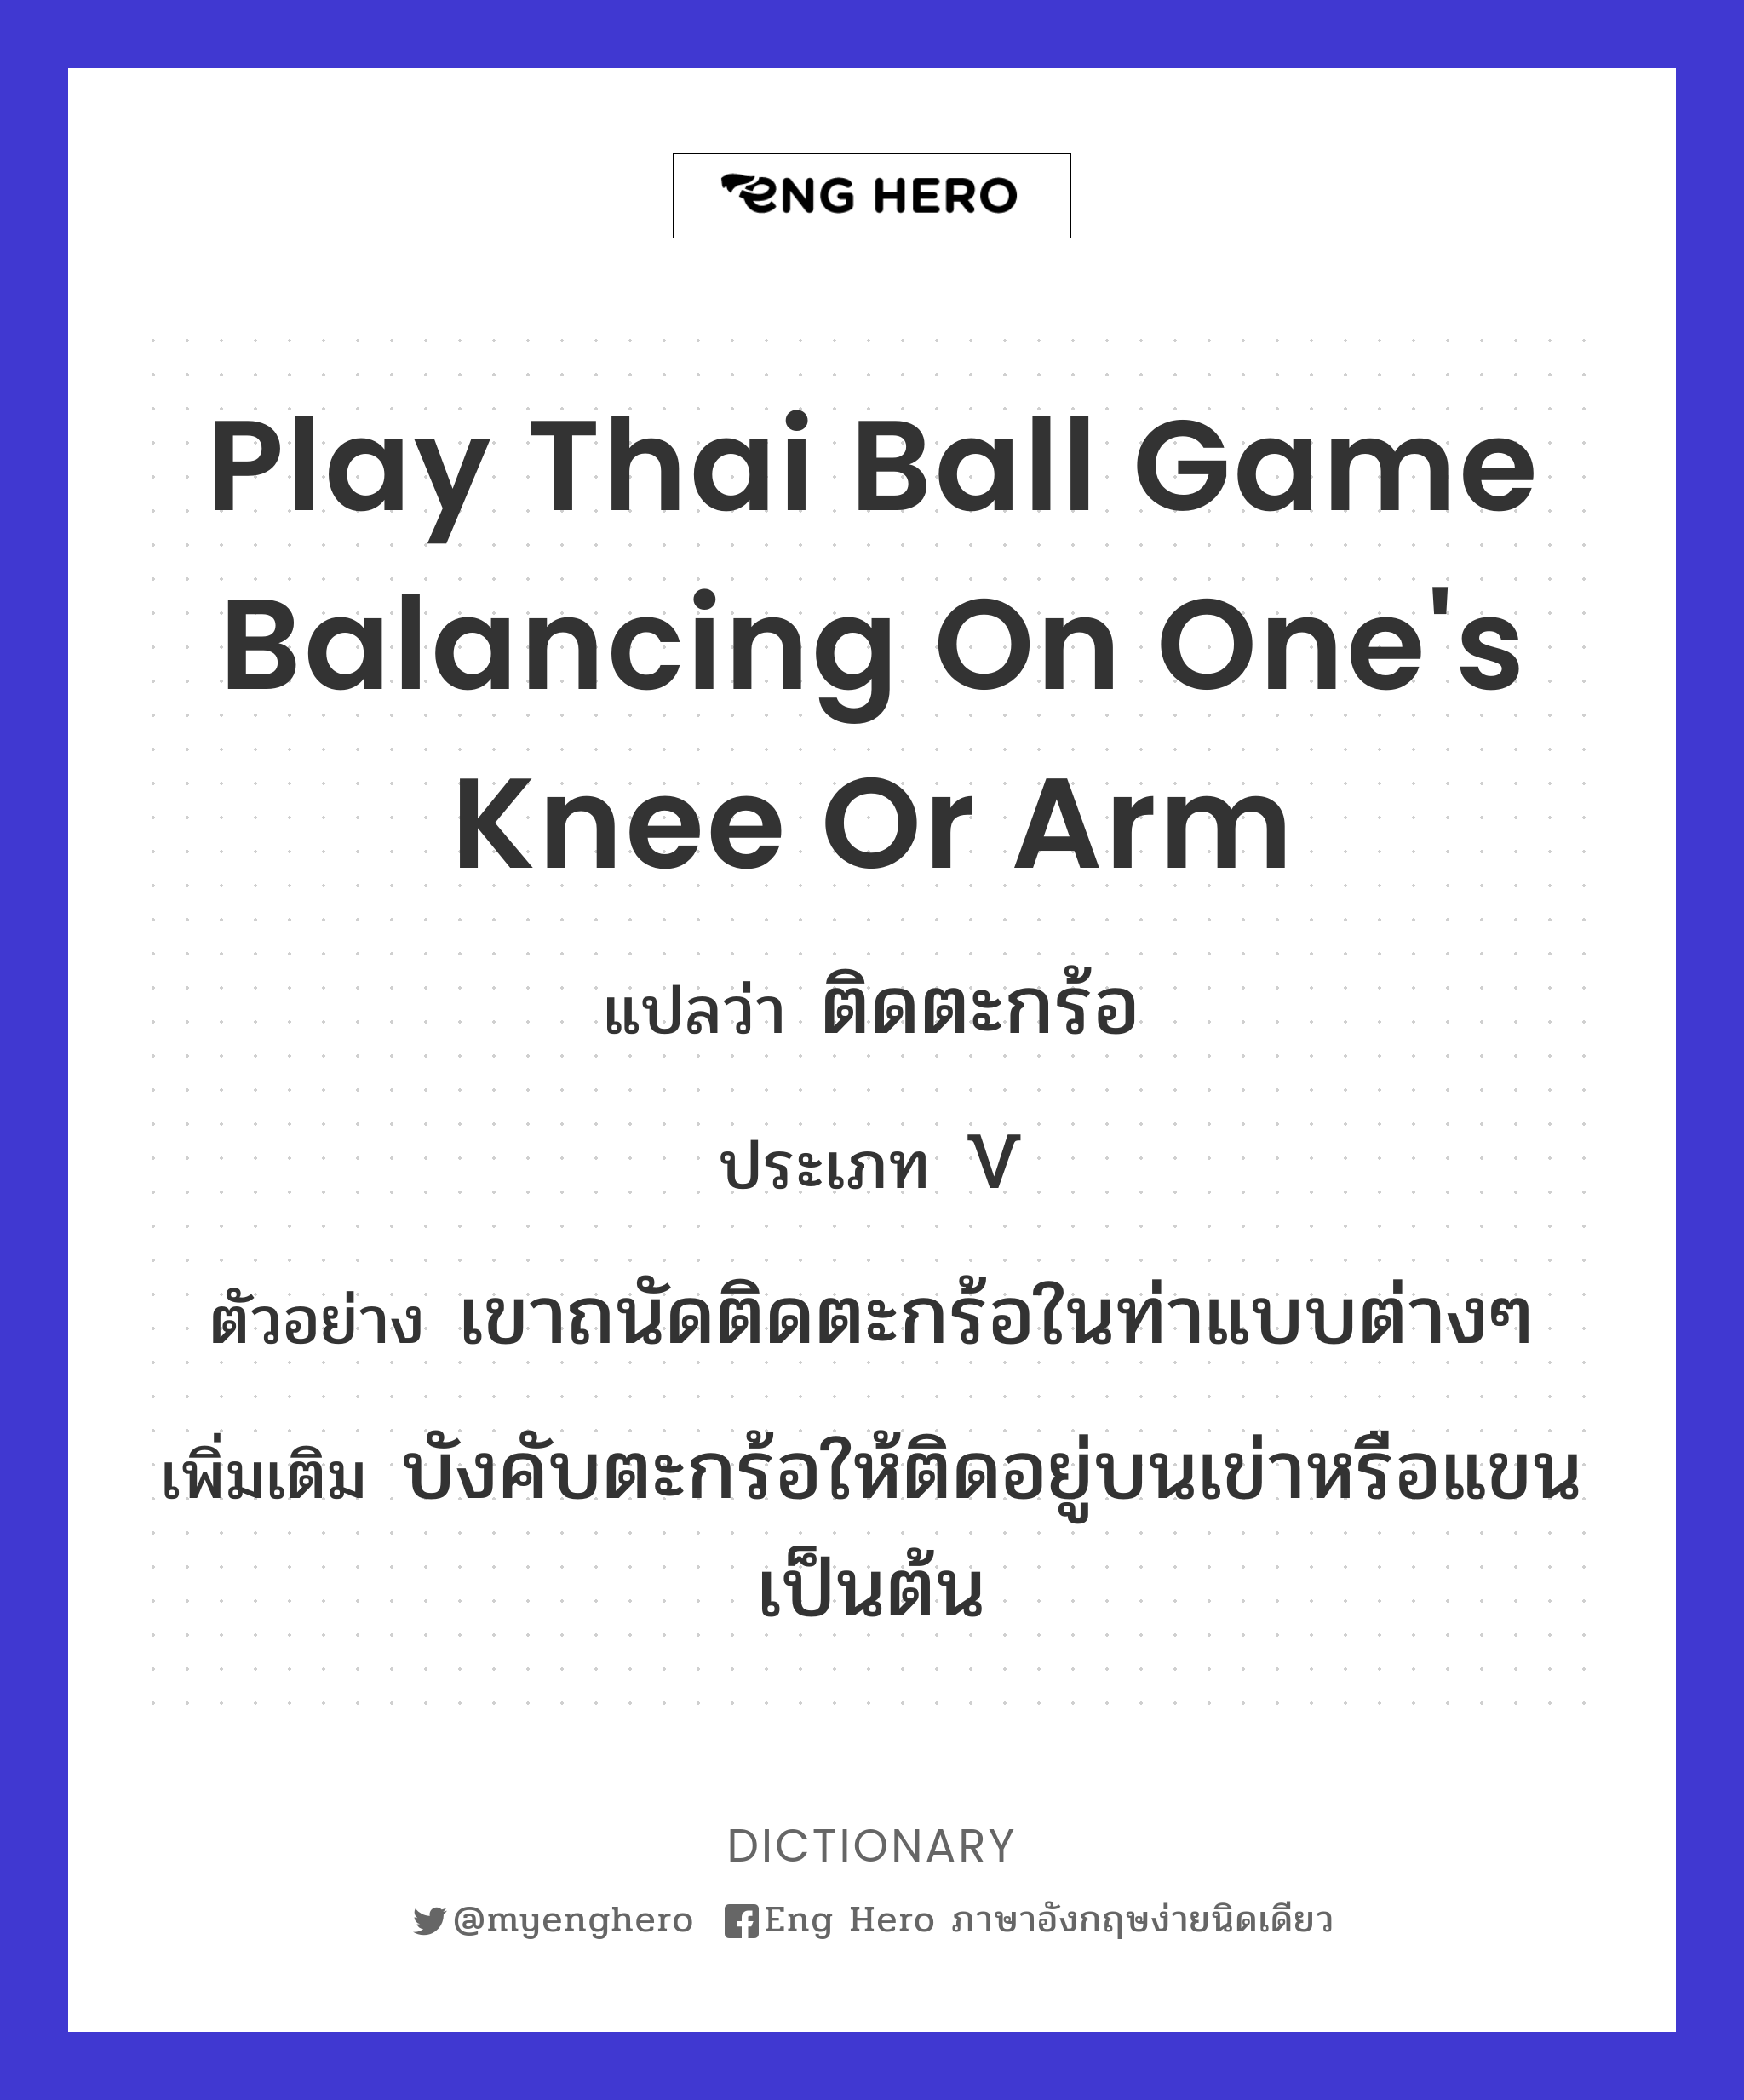 play Thai ball game balancing on one's knee or arm